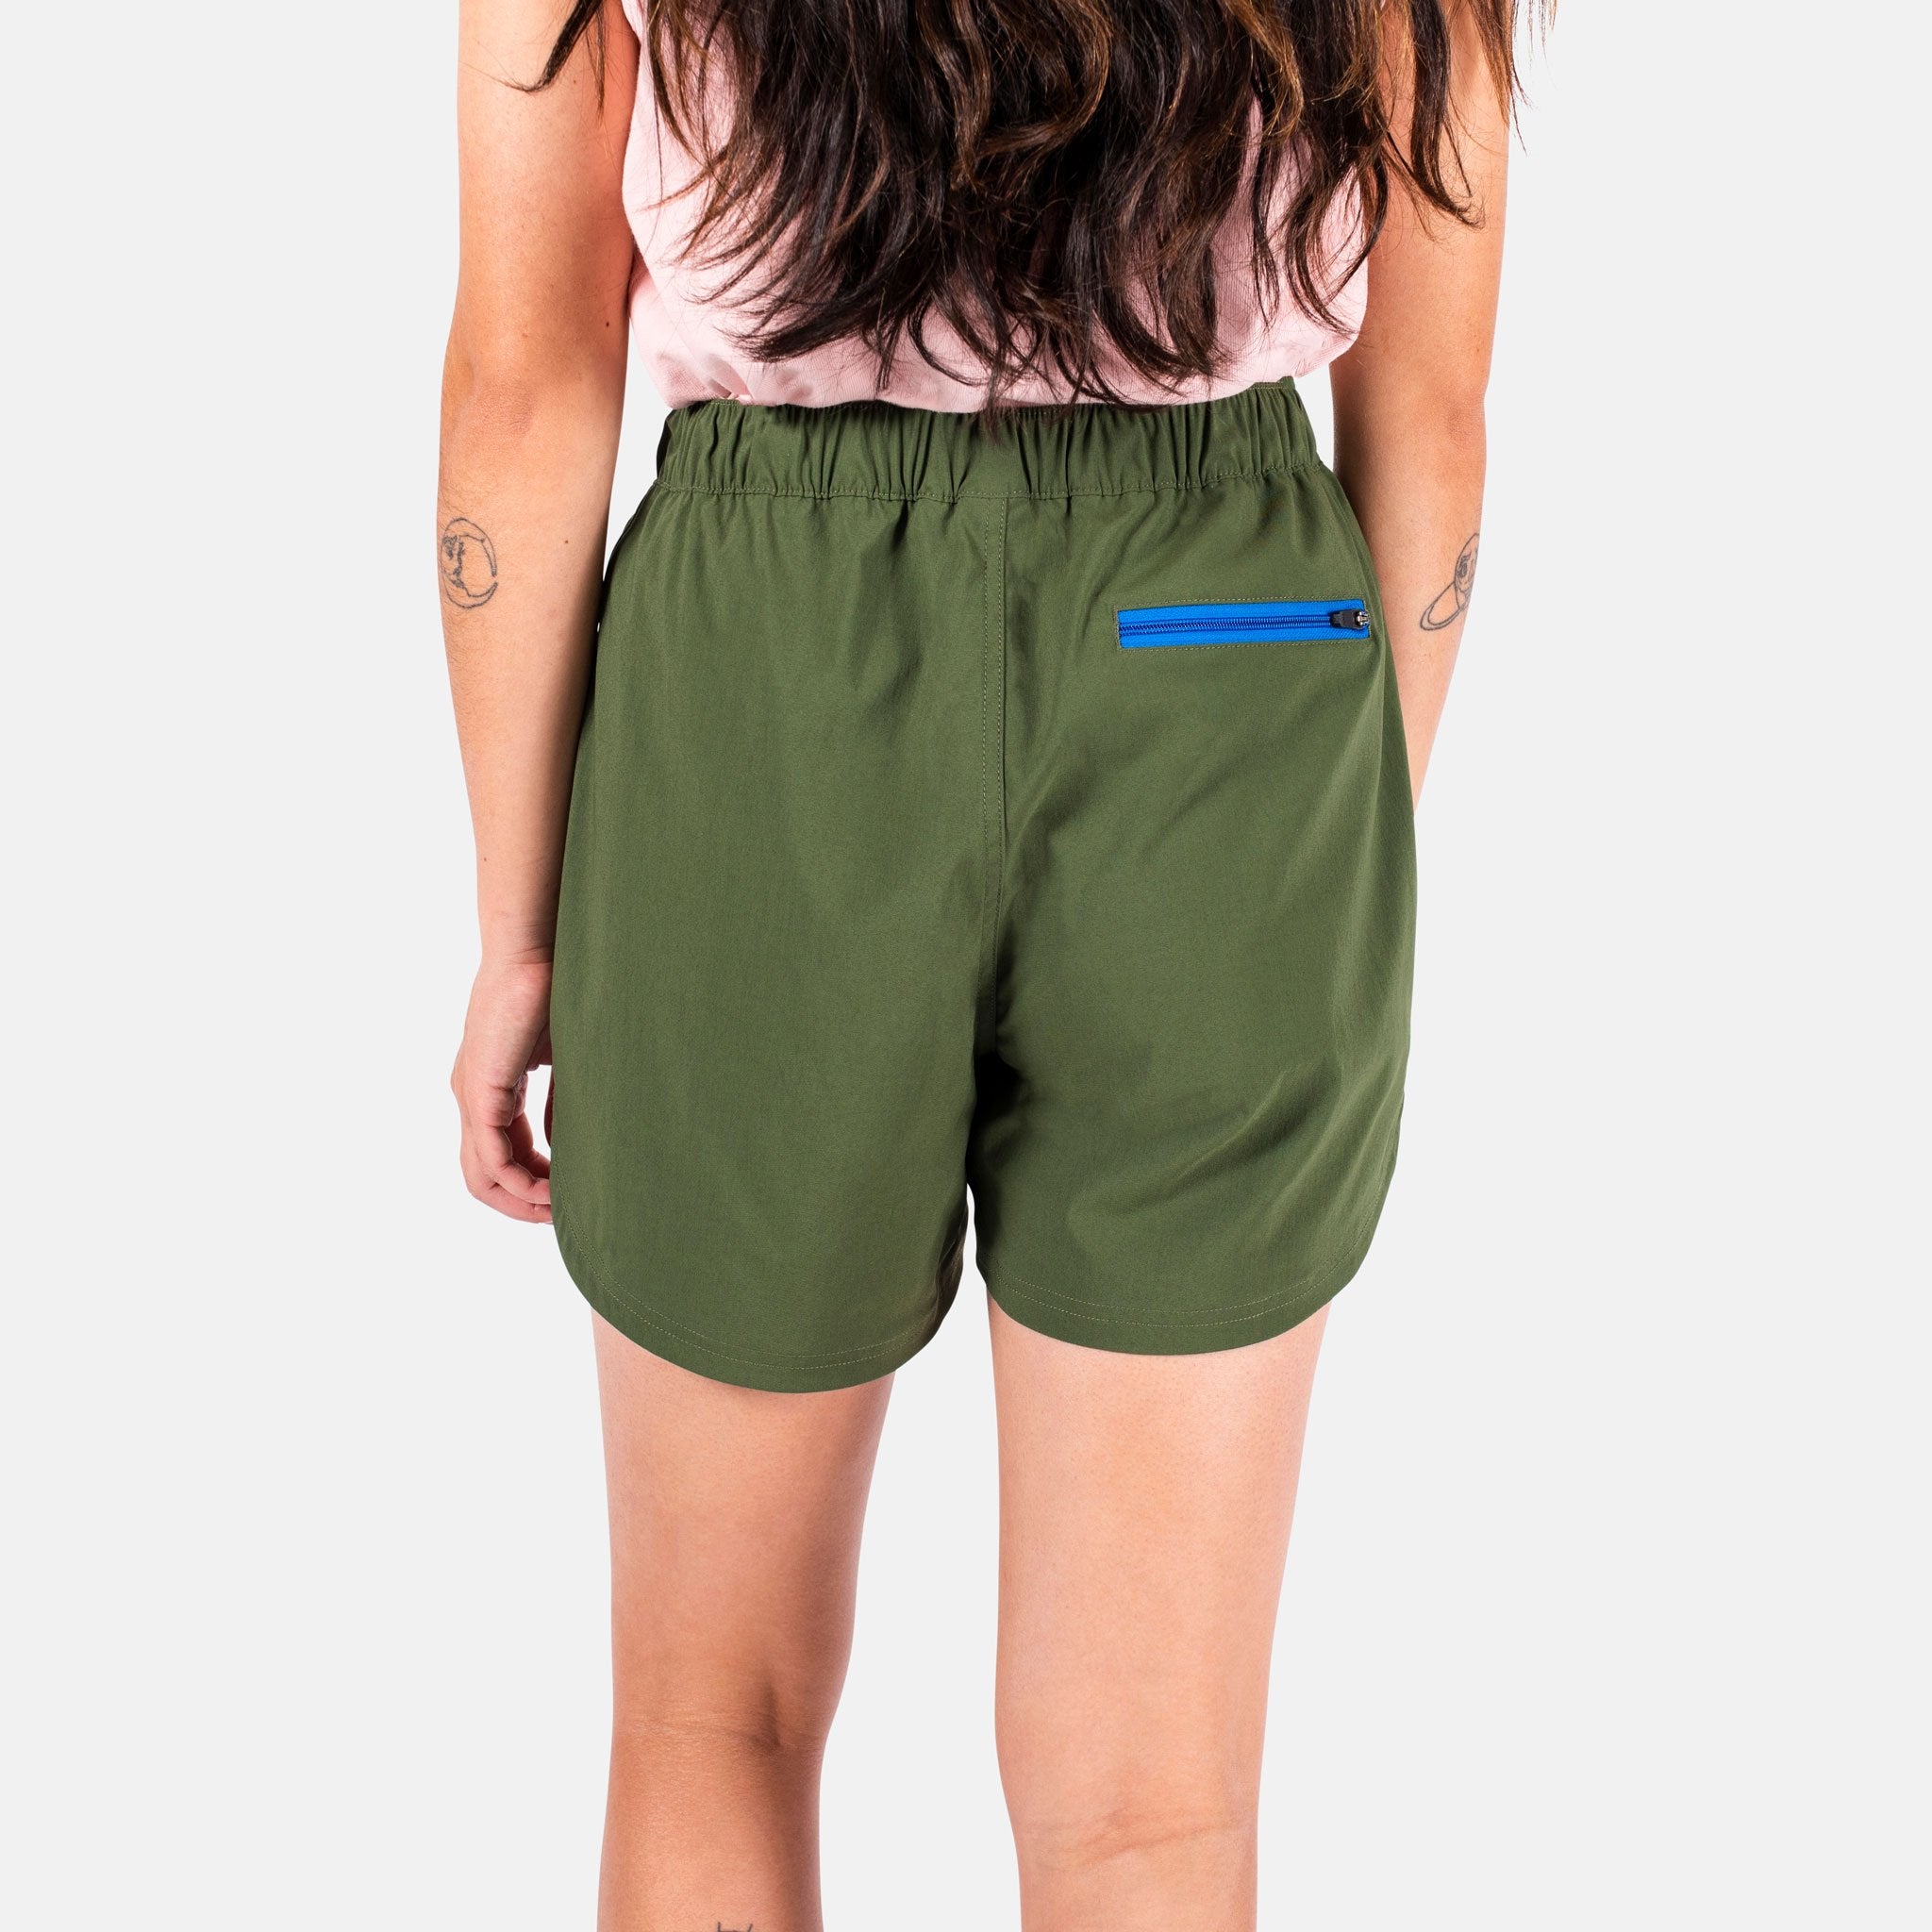 General close-up back model shot of Topo Designs Women's River Shorts in olive green.